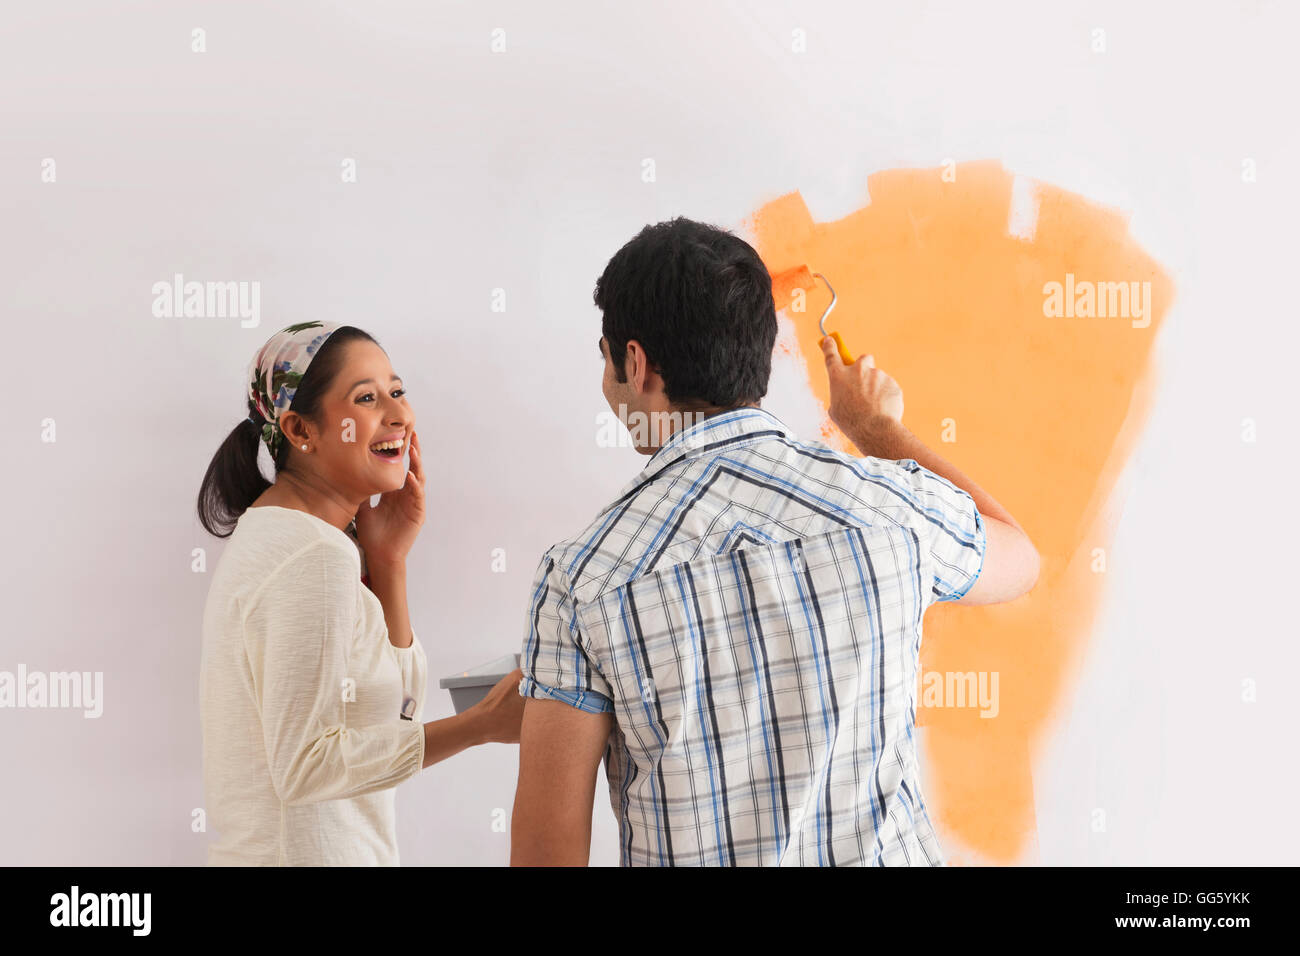 Happy young woman looking at man painting wall Banque D'Images